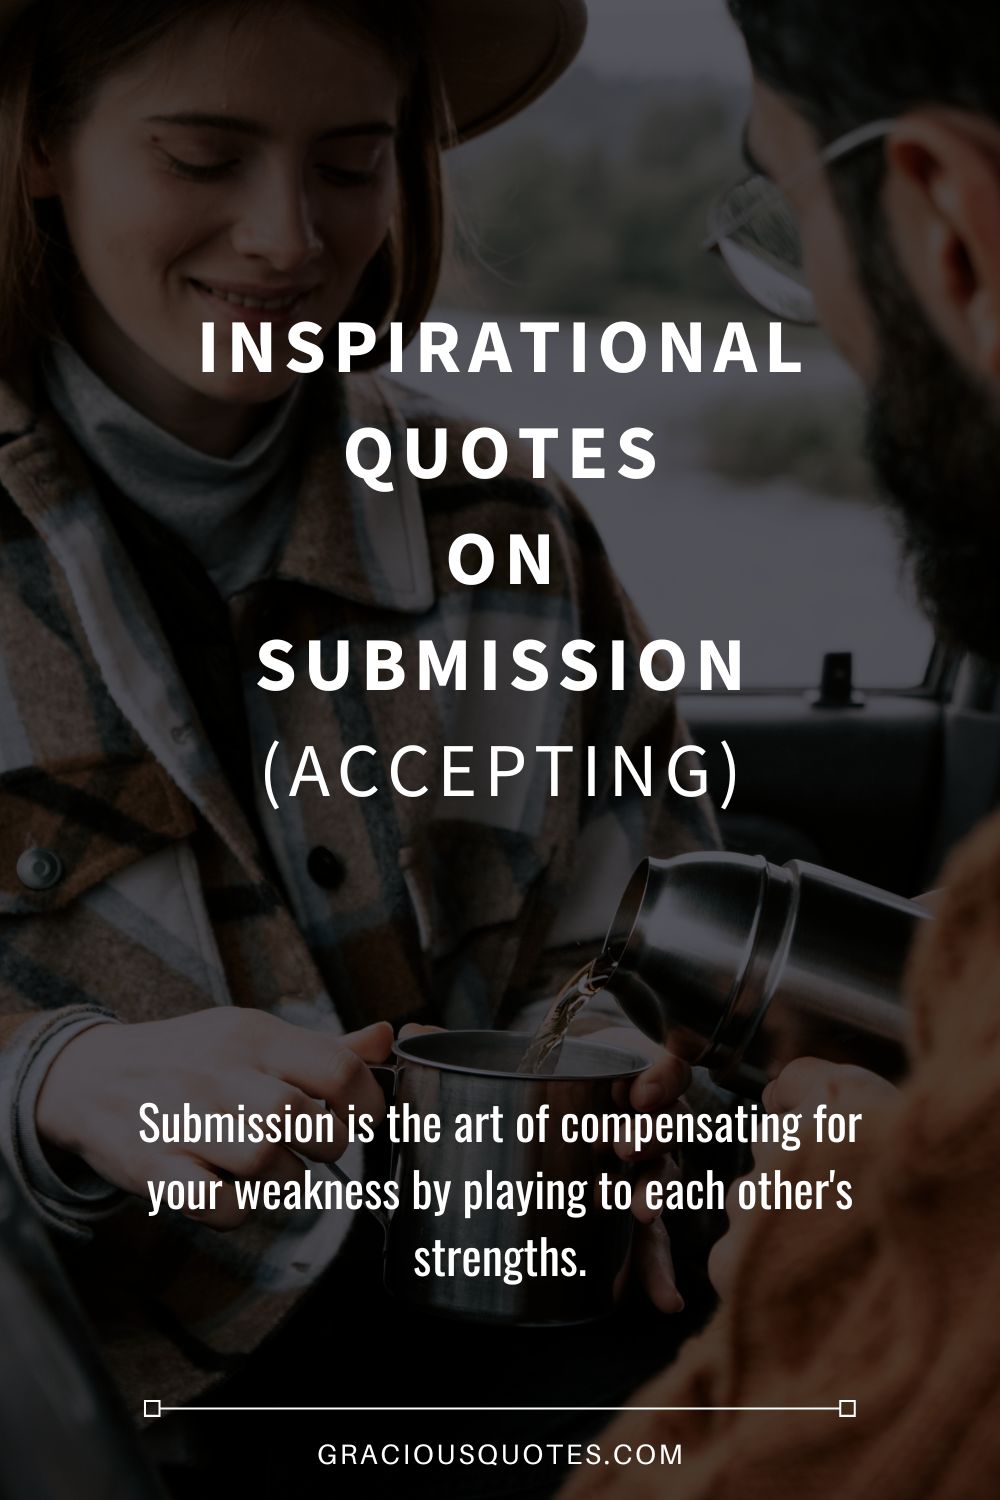 Inspirational Quotes on Submission (ACCEPTING) - Gracious Quotes